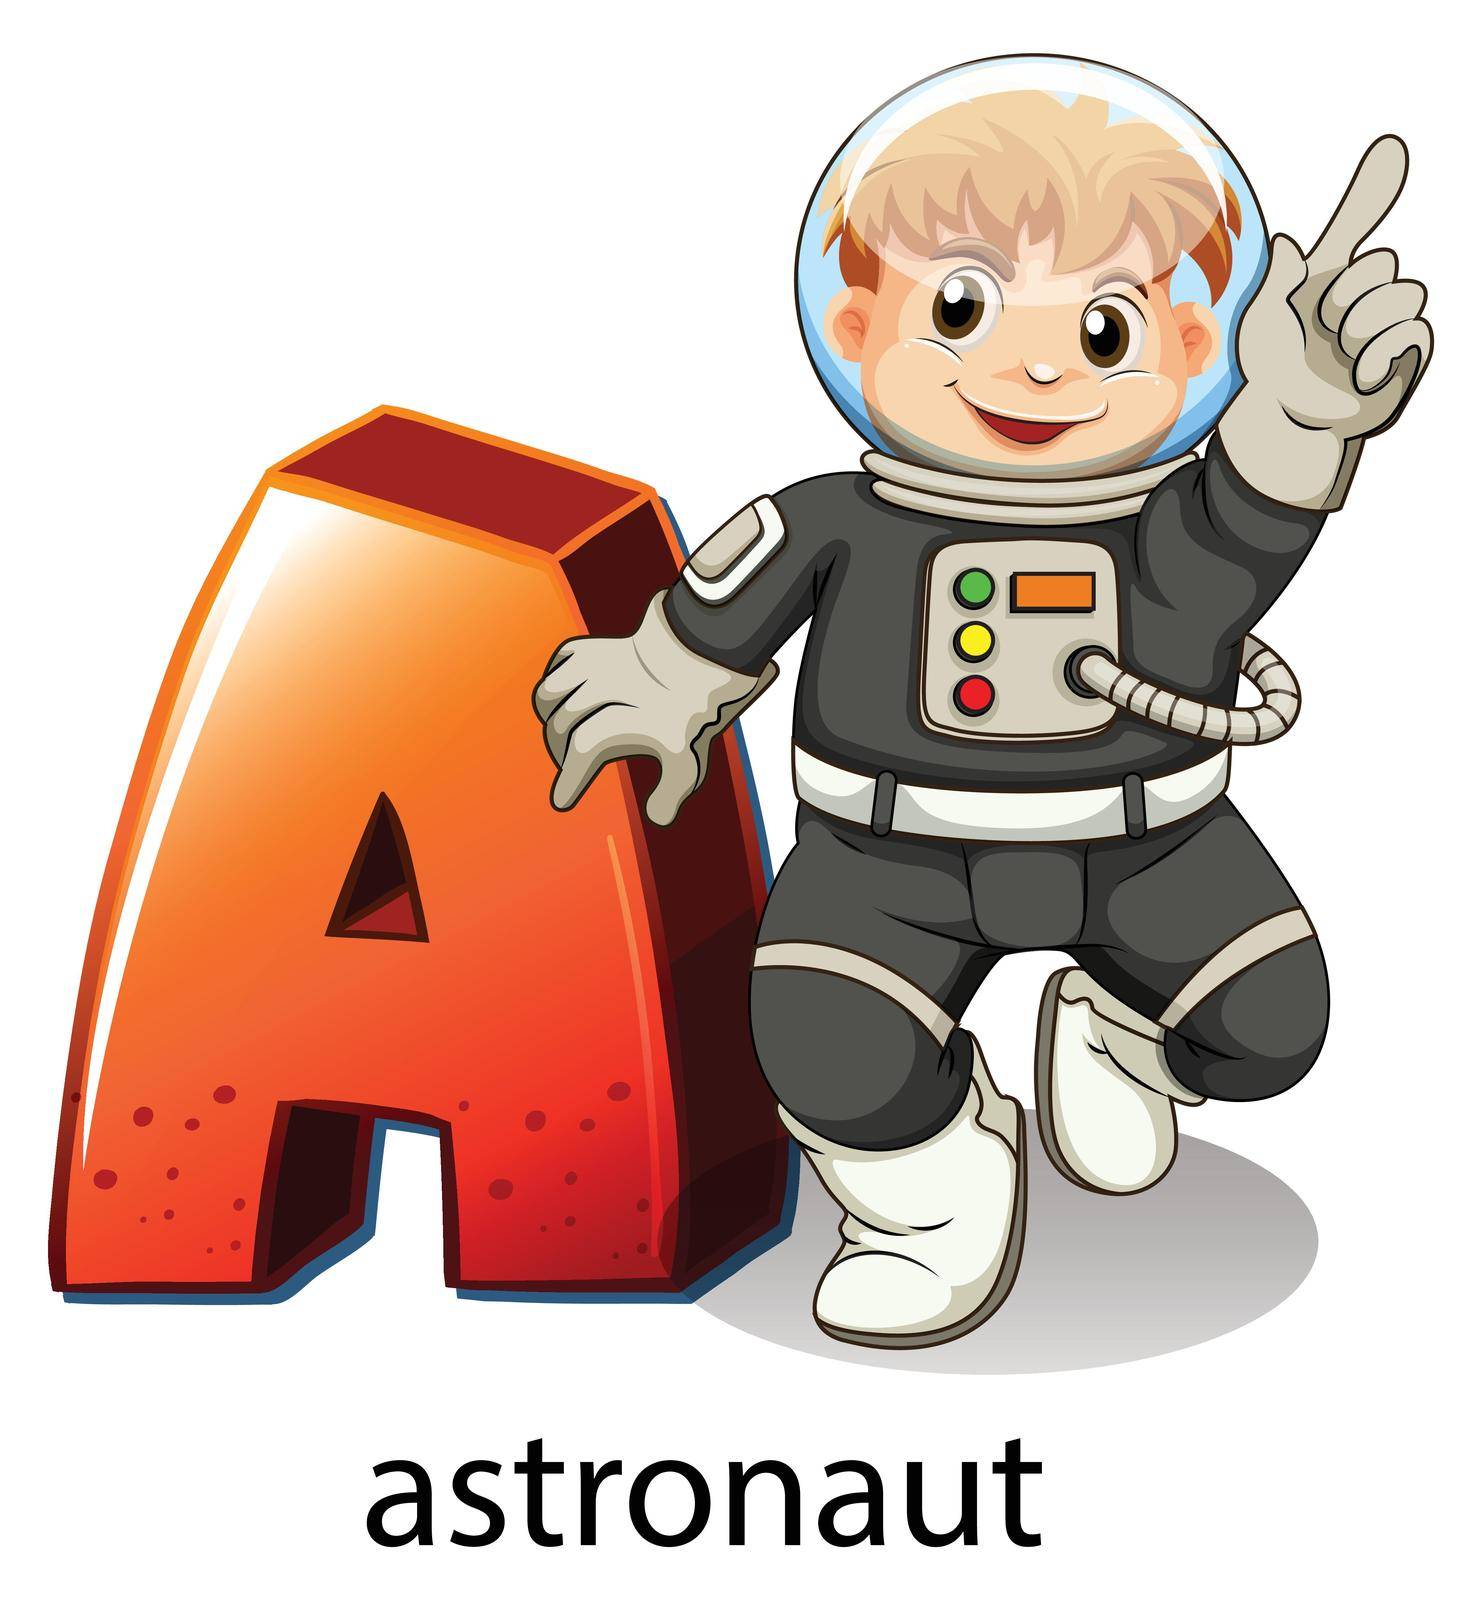 Illustration of a letter A for astronaut on a white background